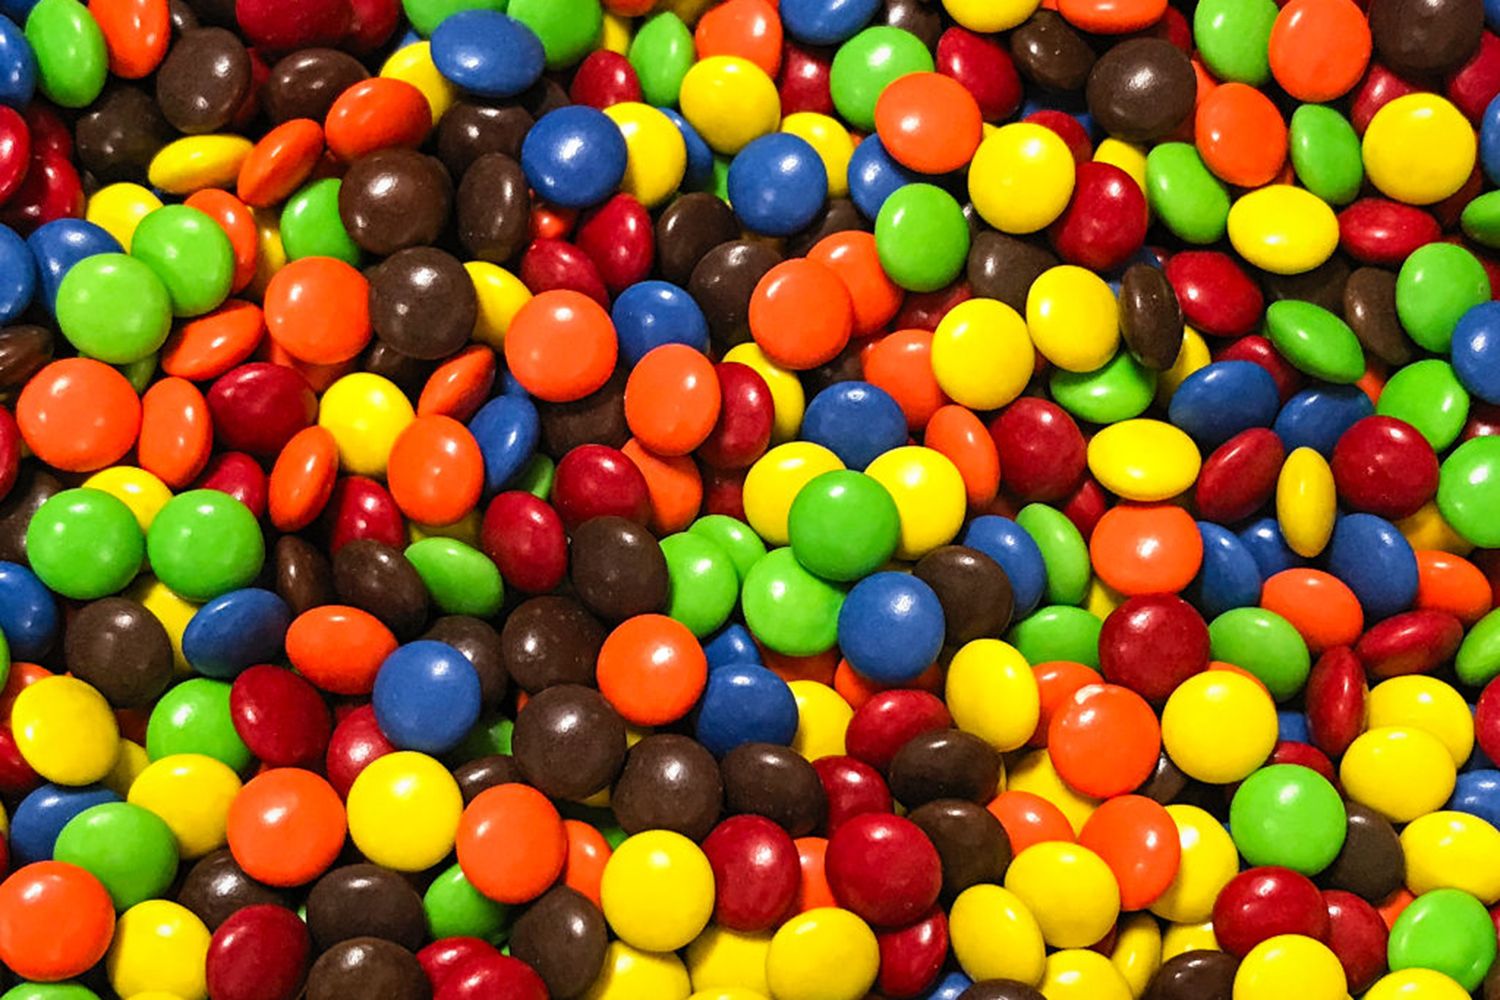 M&M'S will roll out 3 new flavors: Pick one